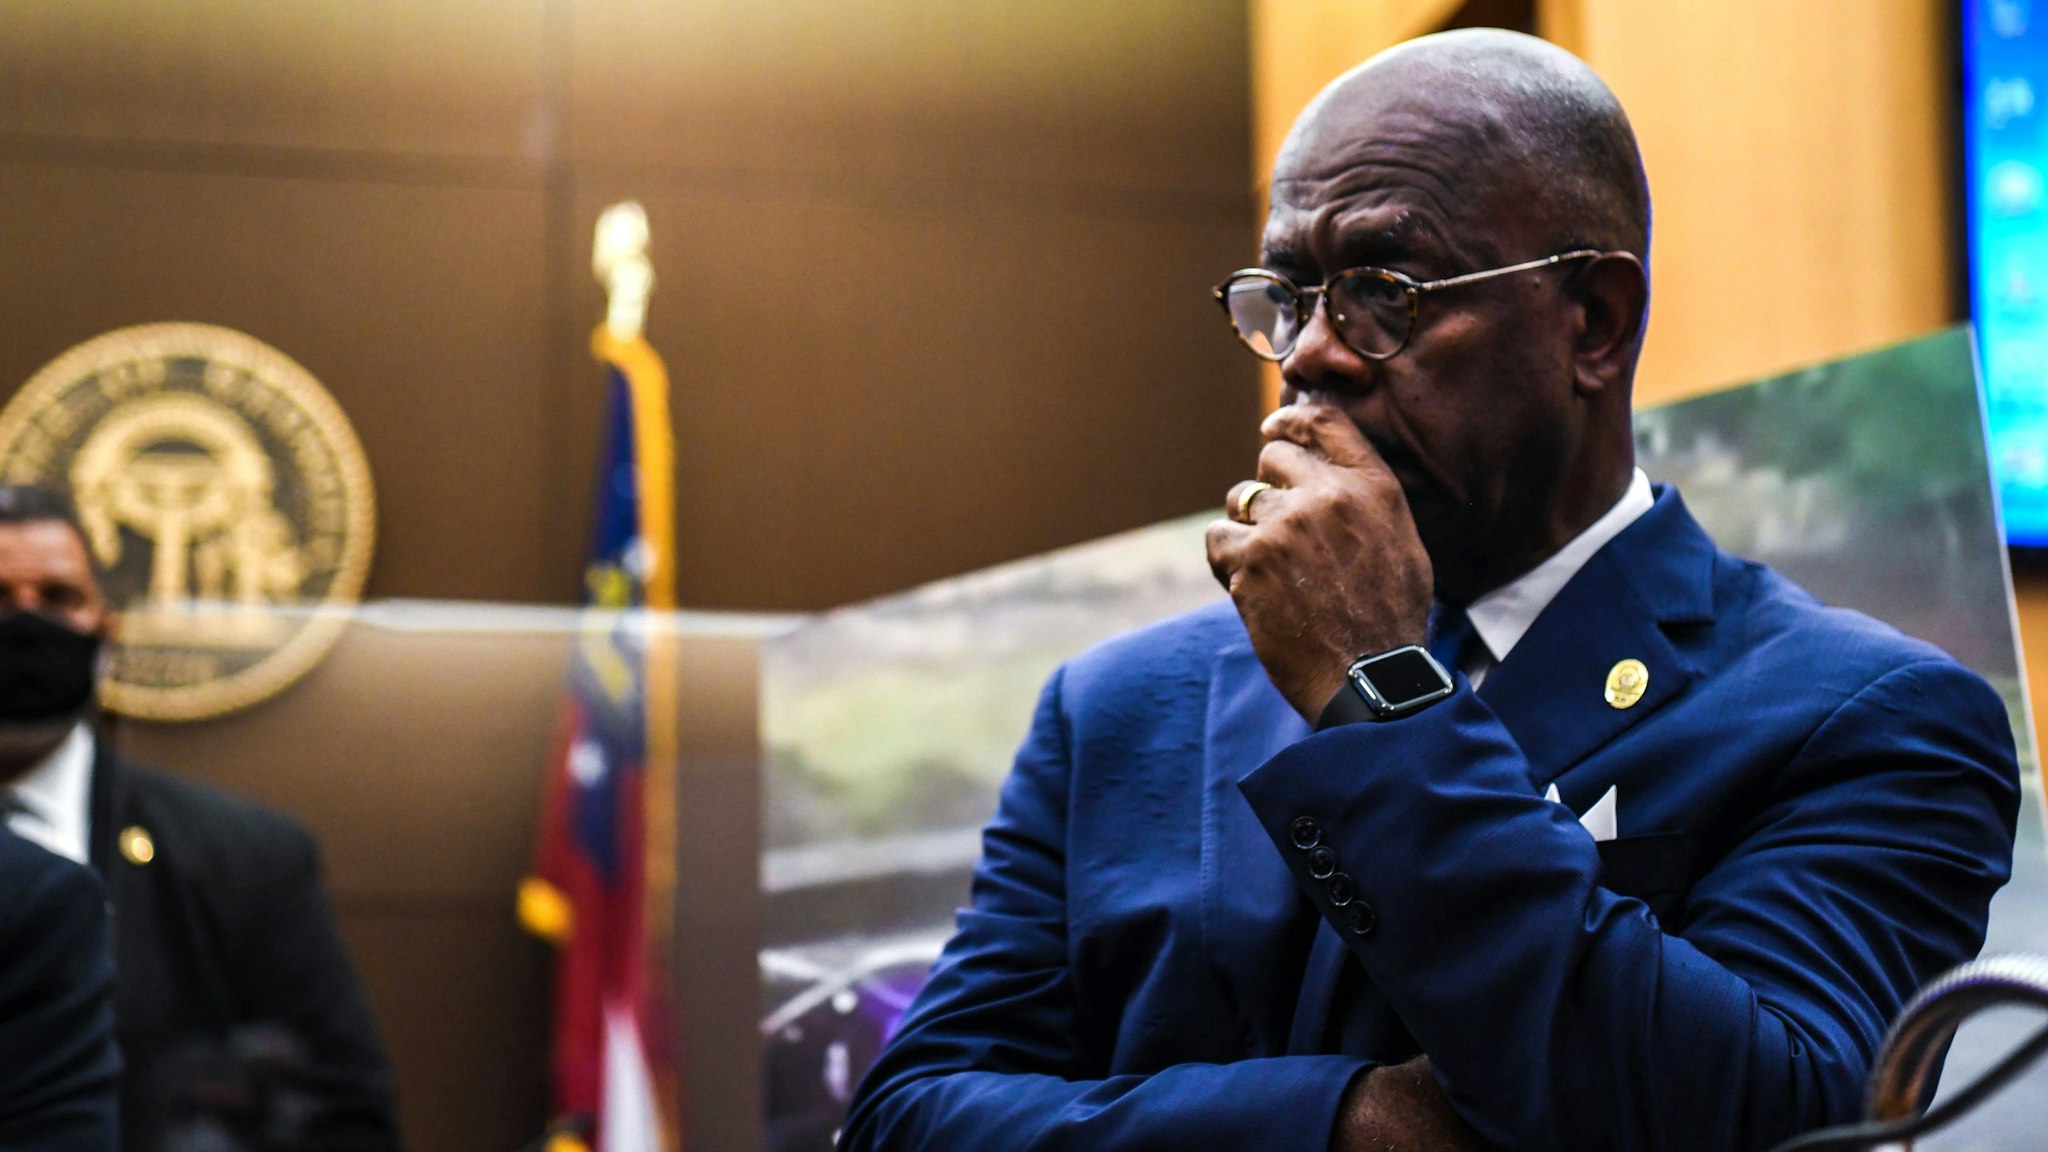 Fulton County District Attorney Paul Howard listens during a pres conference where he announced 11 charges against former Atlanta Police Officer Garrett Rolfe, on June 17, 2020, in Atlanta, Georgia. - Rolfe will be charged with murder for shooting Rayshard Brook, 27, in the back, Howard, announced, in the latest case to spark anger over police killings of African Americans.